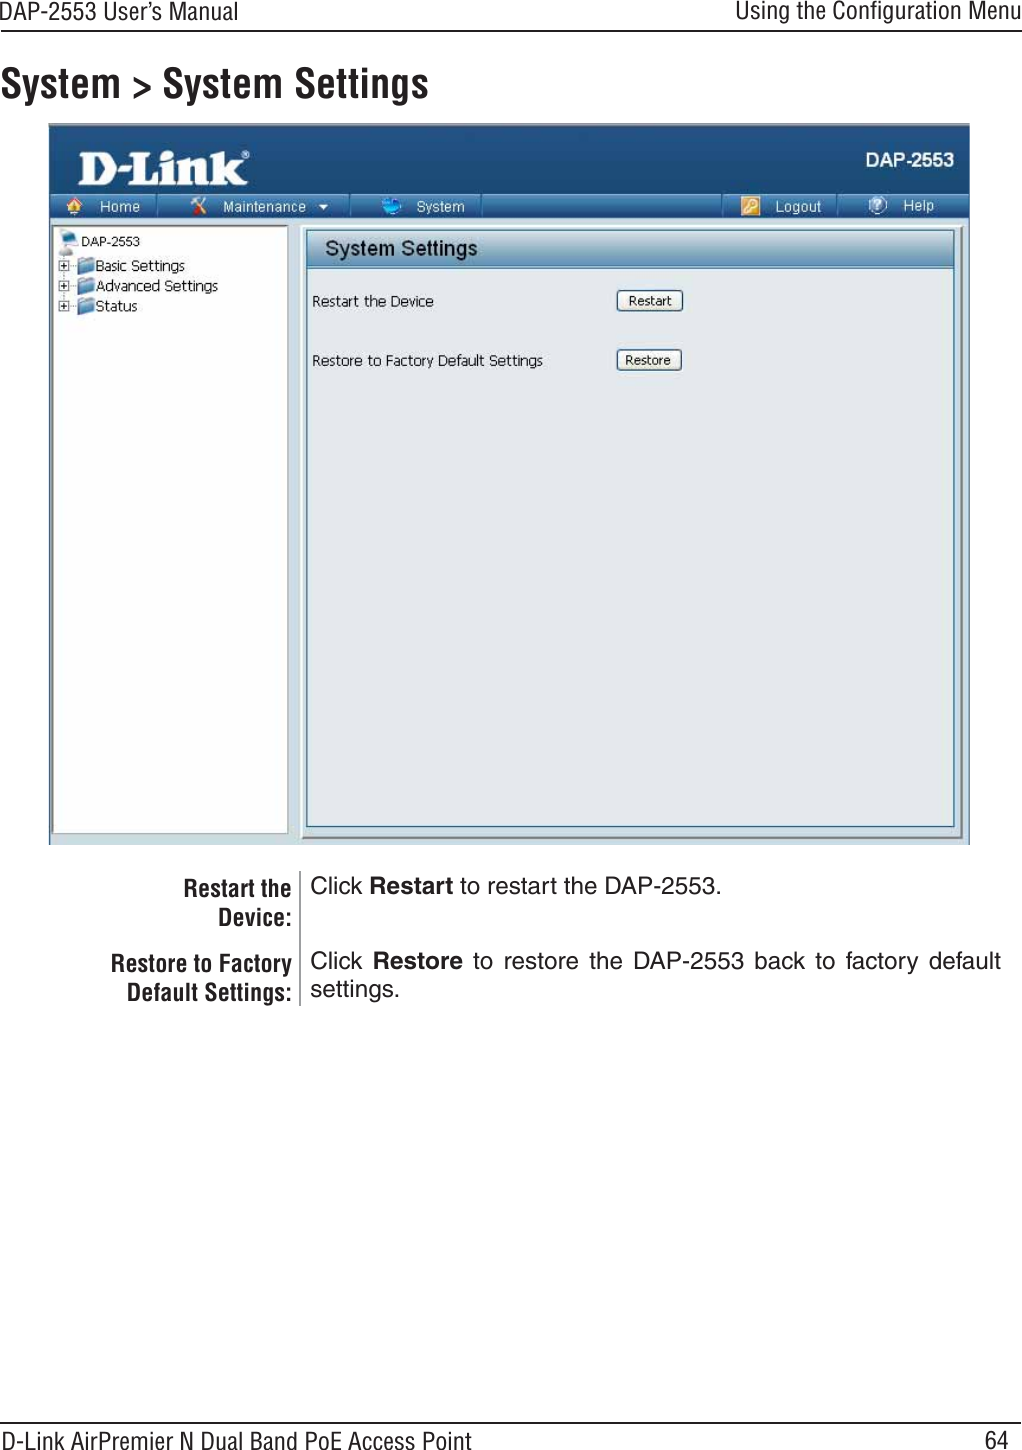 64DAP-2553 User’s ManualD-Link AirPremier N Dual Band PoE Access PointUsing the Conﬁguration MenuSystem &gt; System SettingsRestart the Device:Click Restart to restart the DAP-2553.Restore to Factory Default Settings: Click Restore to restore the DAP-2553 back to factory defaultsettings.